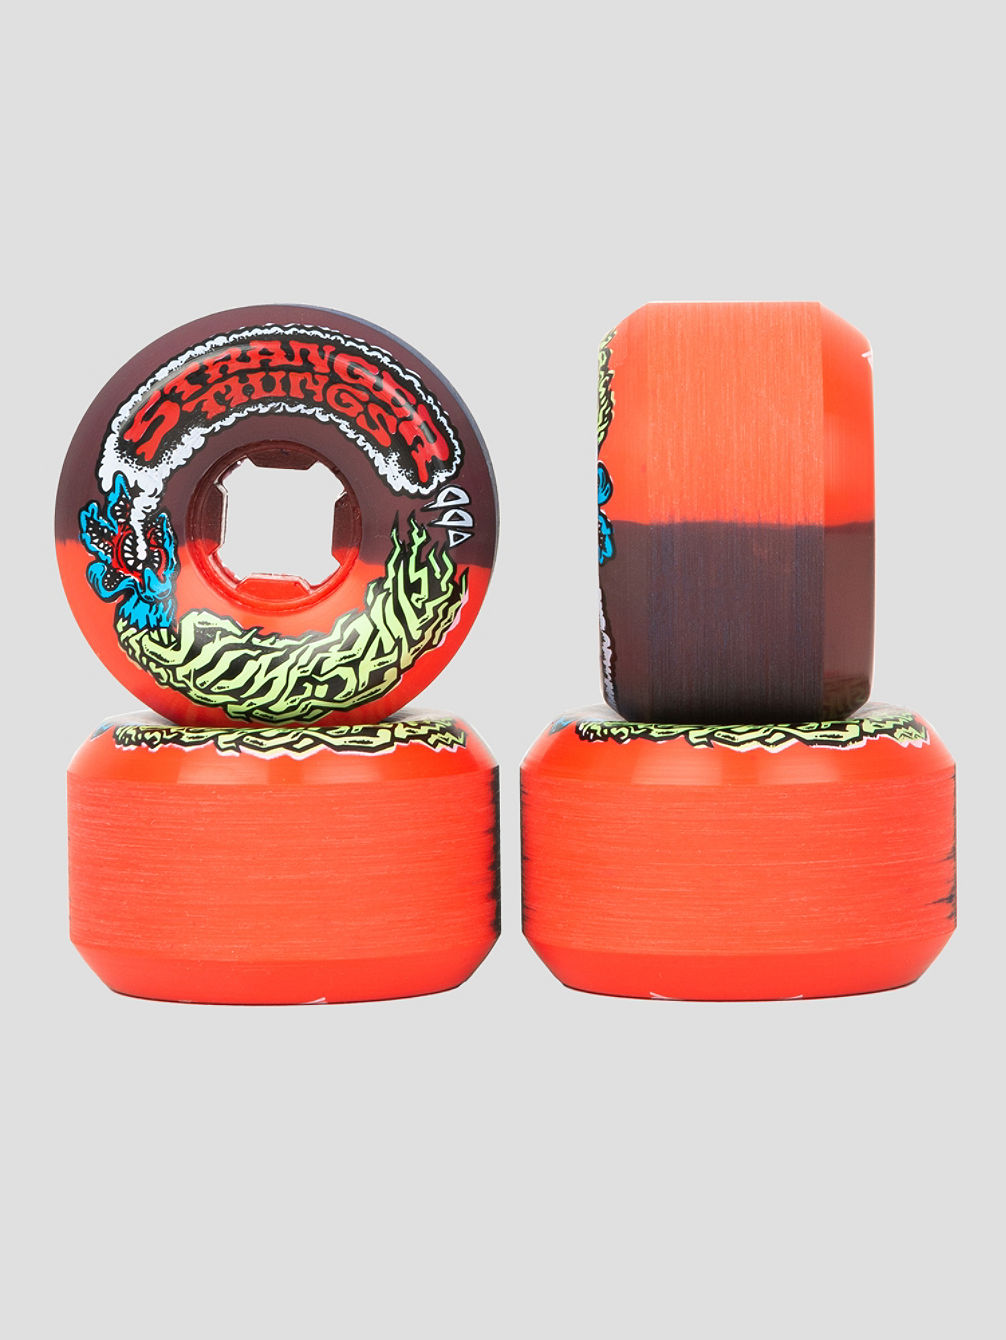 54mm Stranger Things Vomits 54mm Ruote